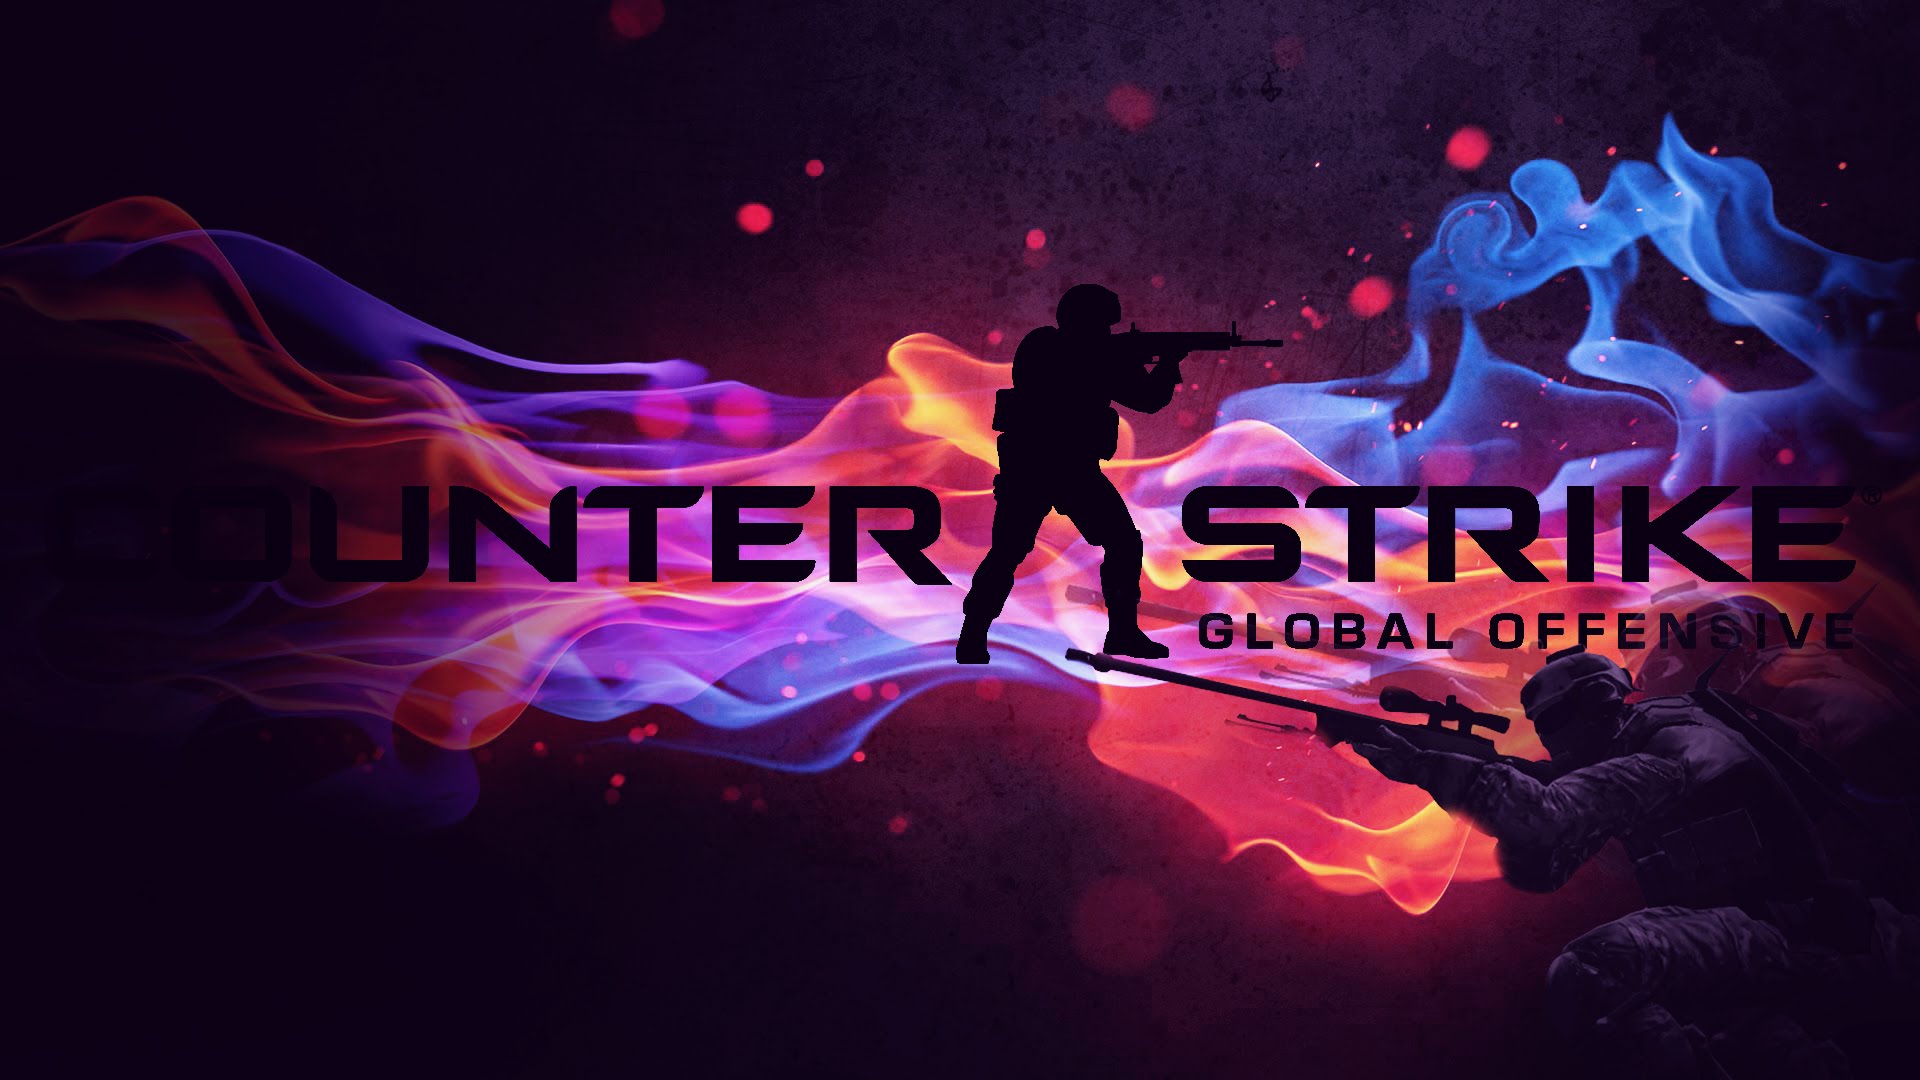 Counter-Strike: Global Offensive Wallpapers, Pictures, Images - 1920 x 1080 jpeg 195kB